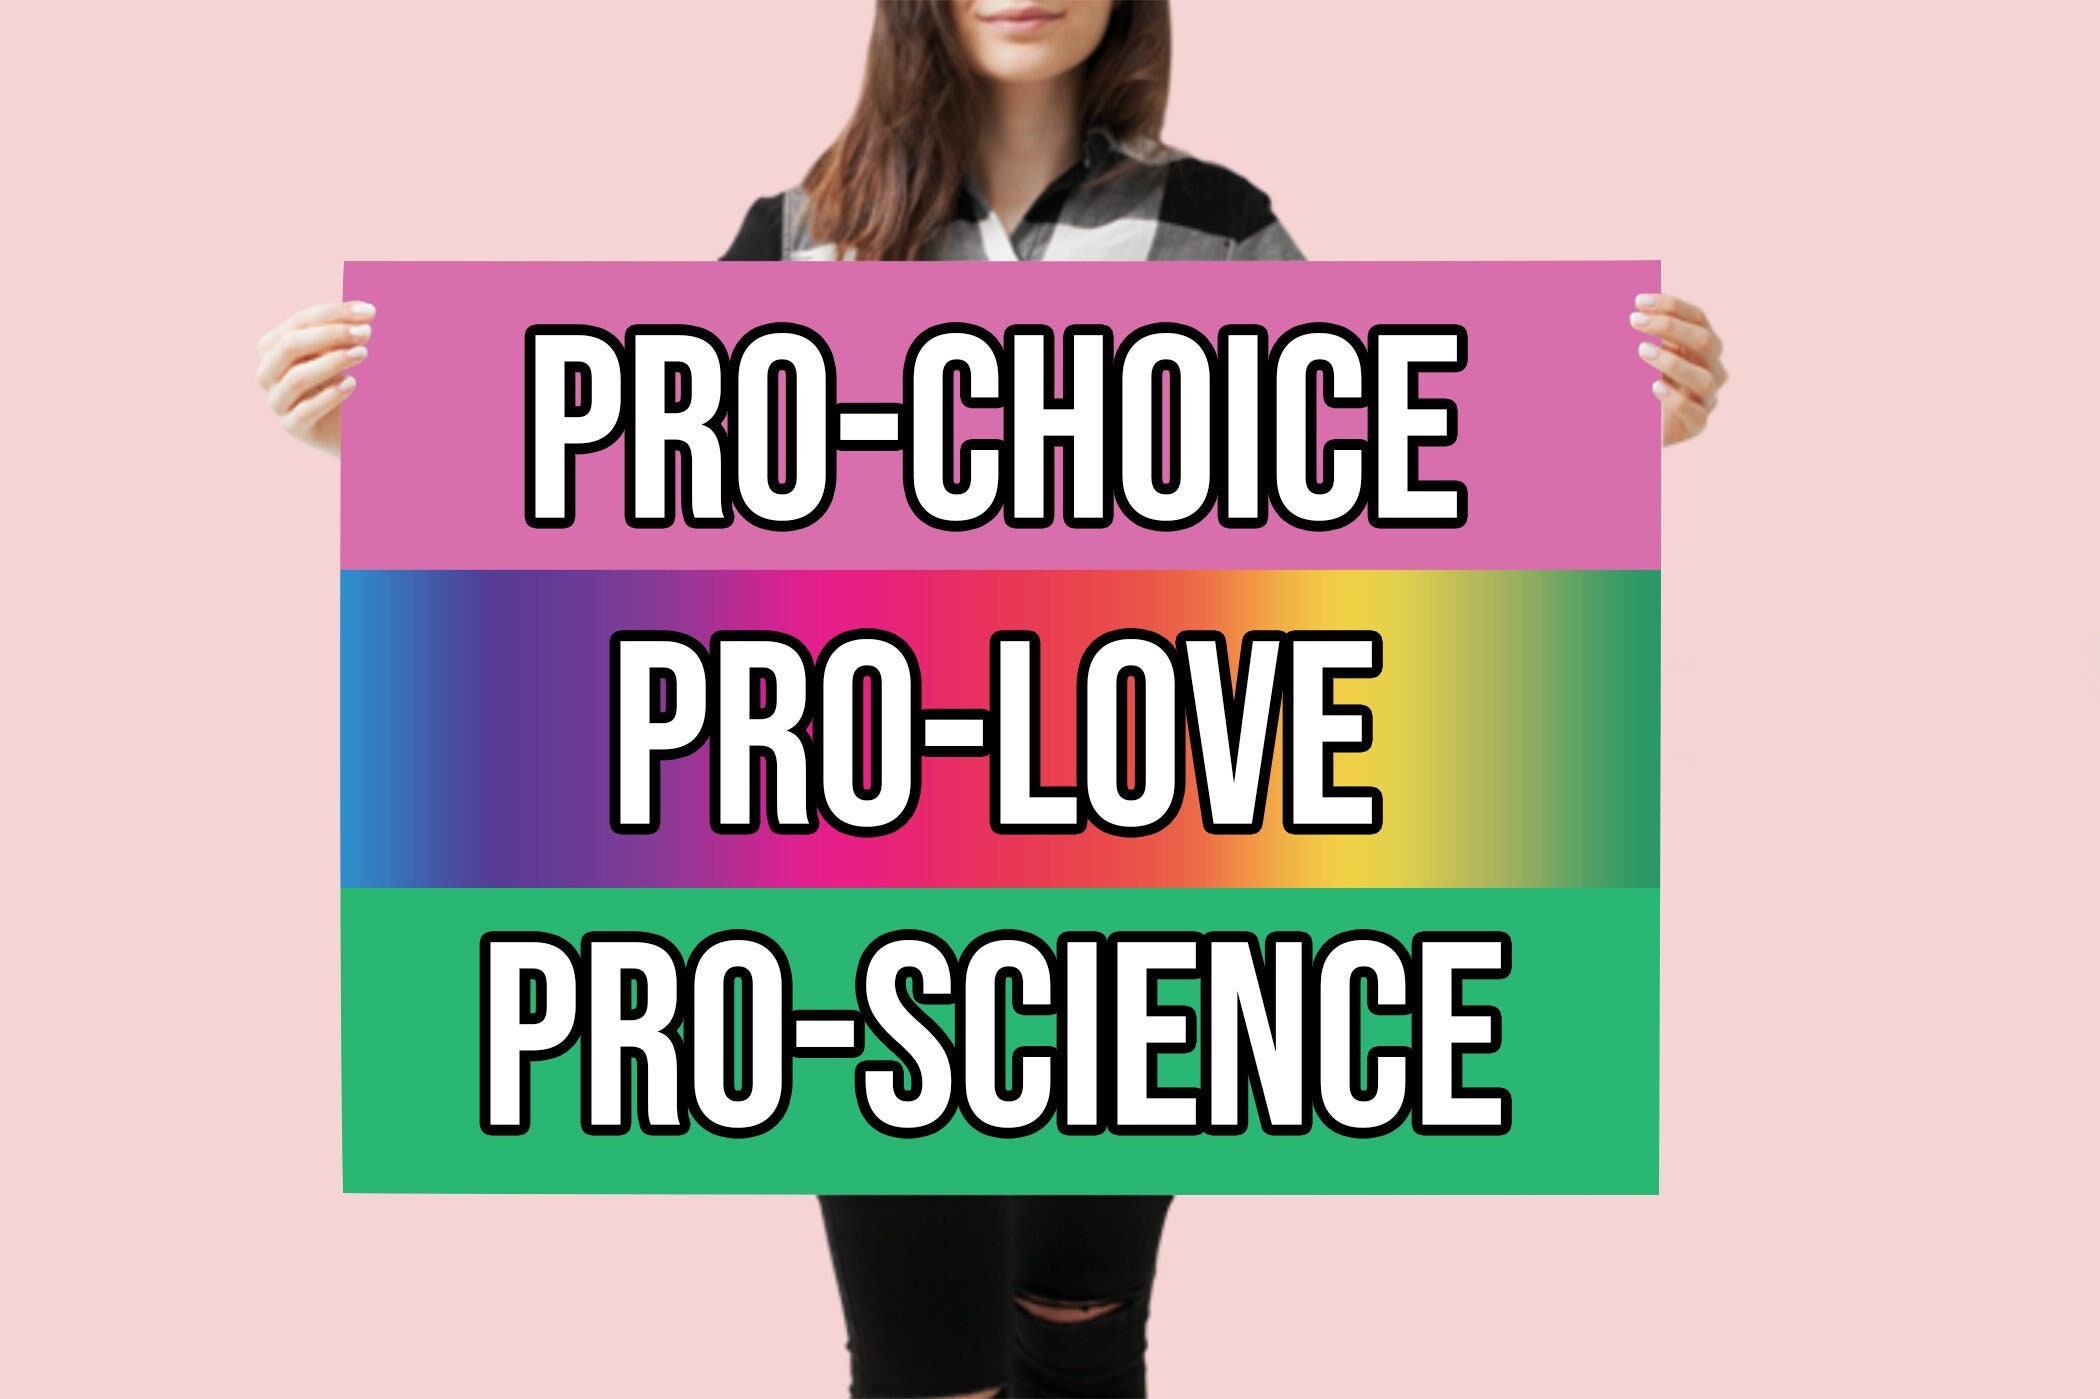 Pro-Choice Pro-Love Pro-Science, Reproductive Rights Poster, Abortion Rights Poster, Roe v wade poster, Pro choice poster